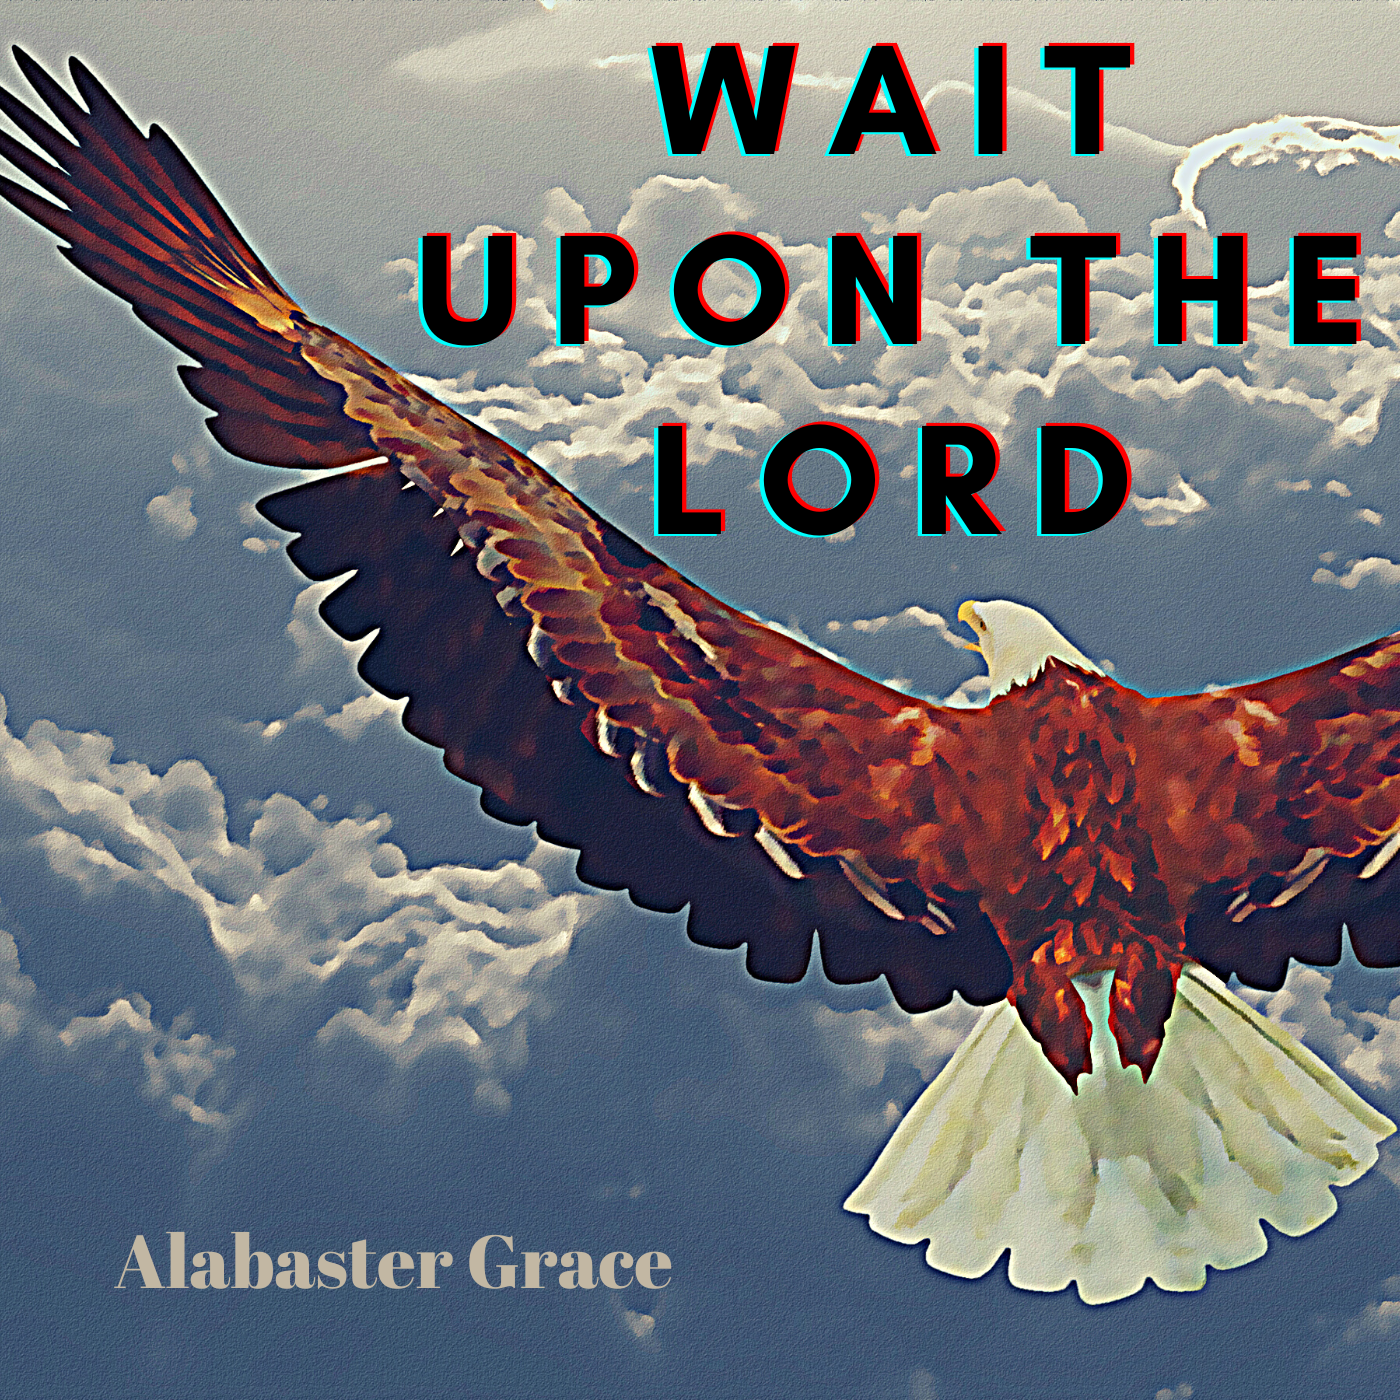 Wait Upon the Lord by Alabaster Grace